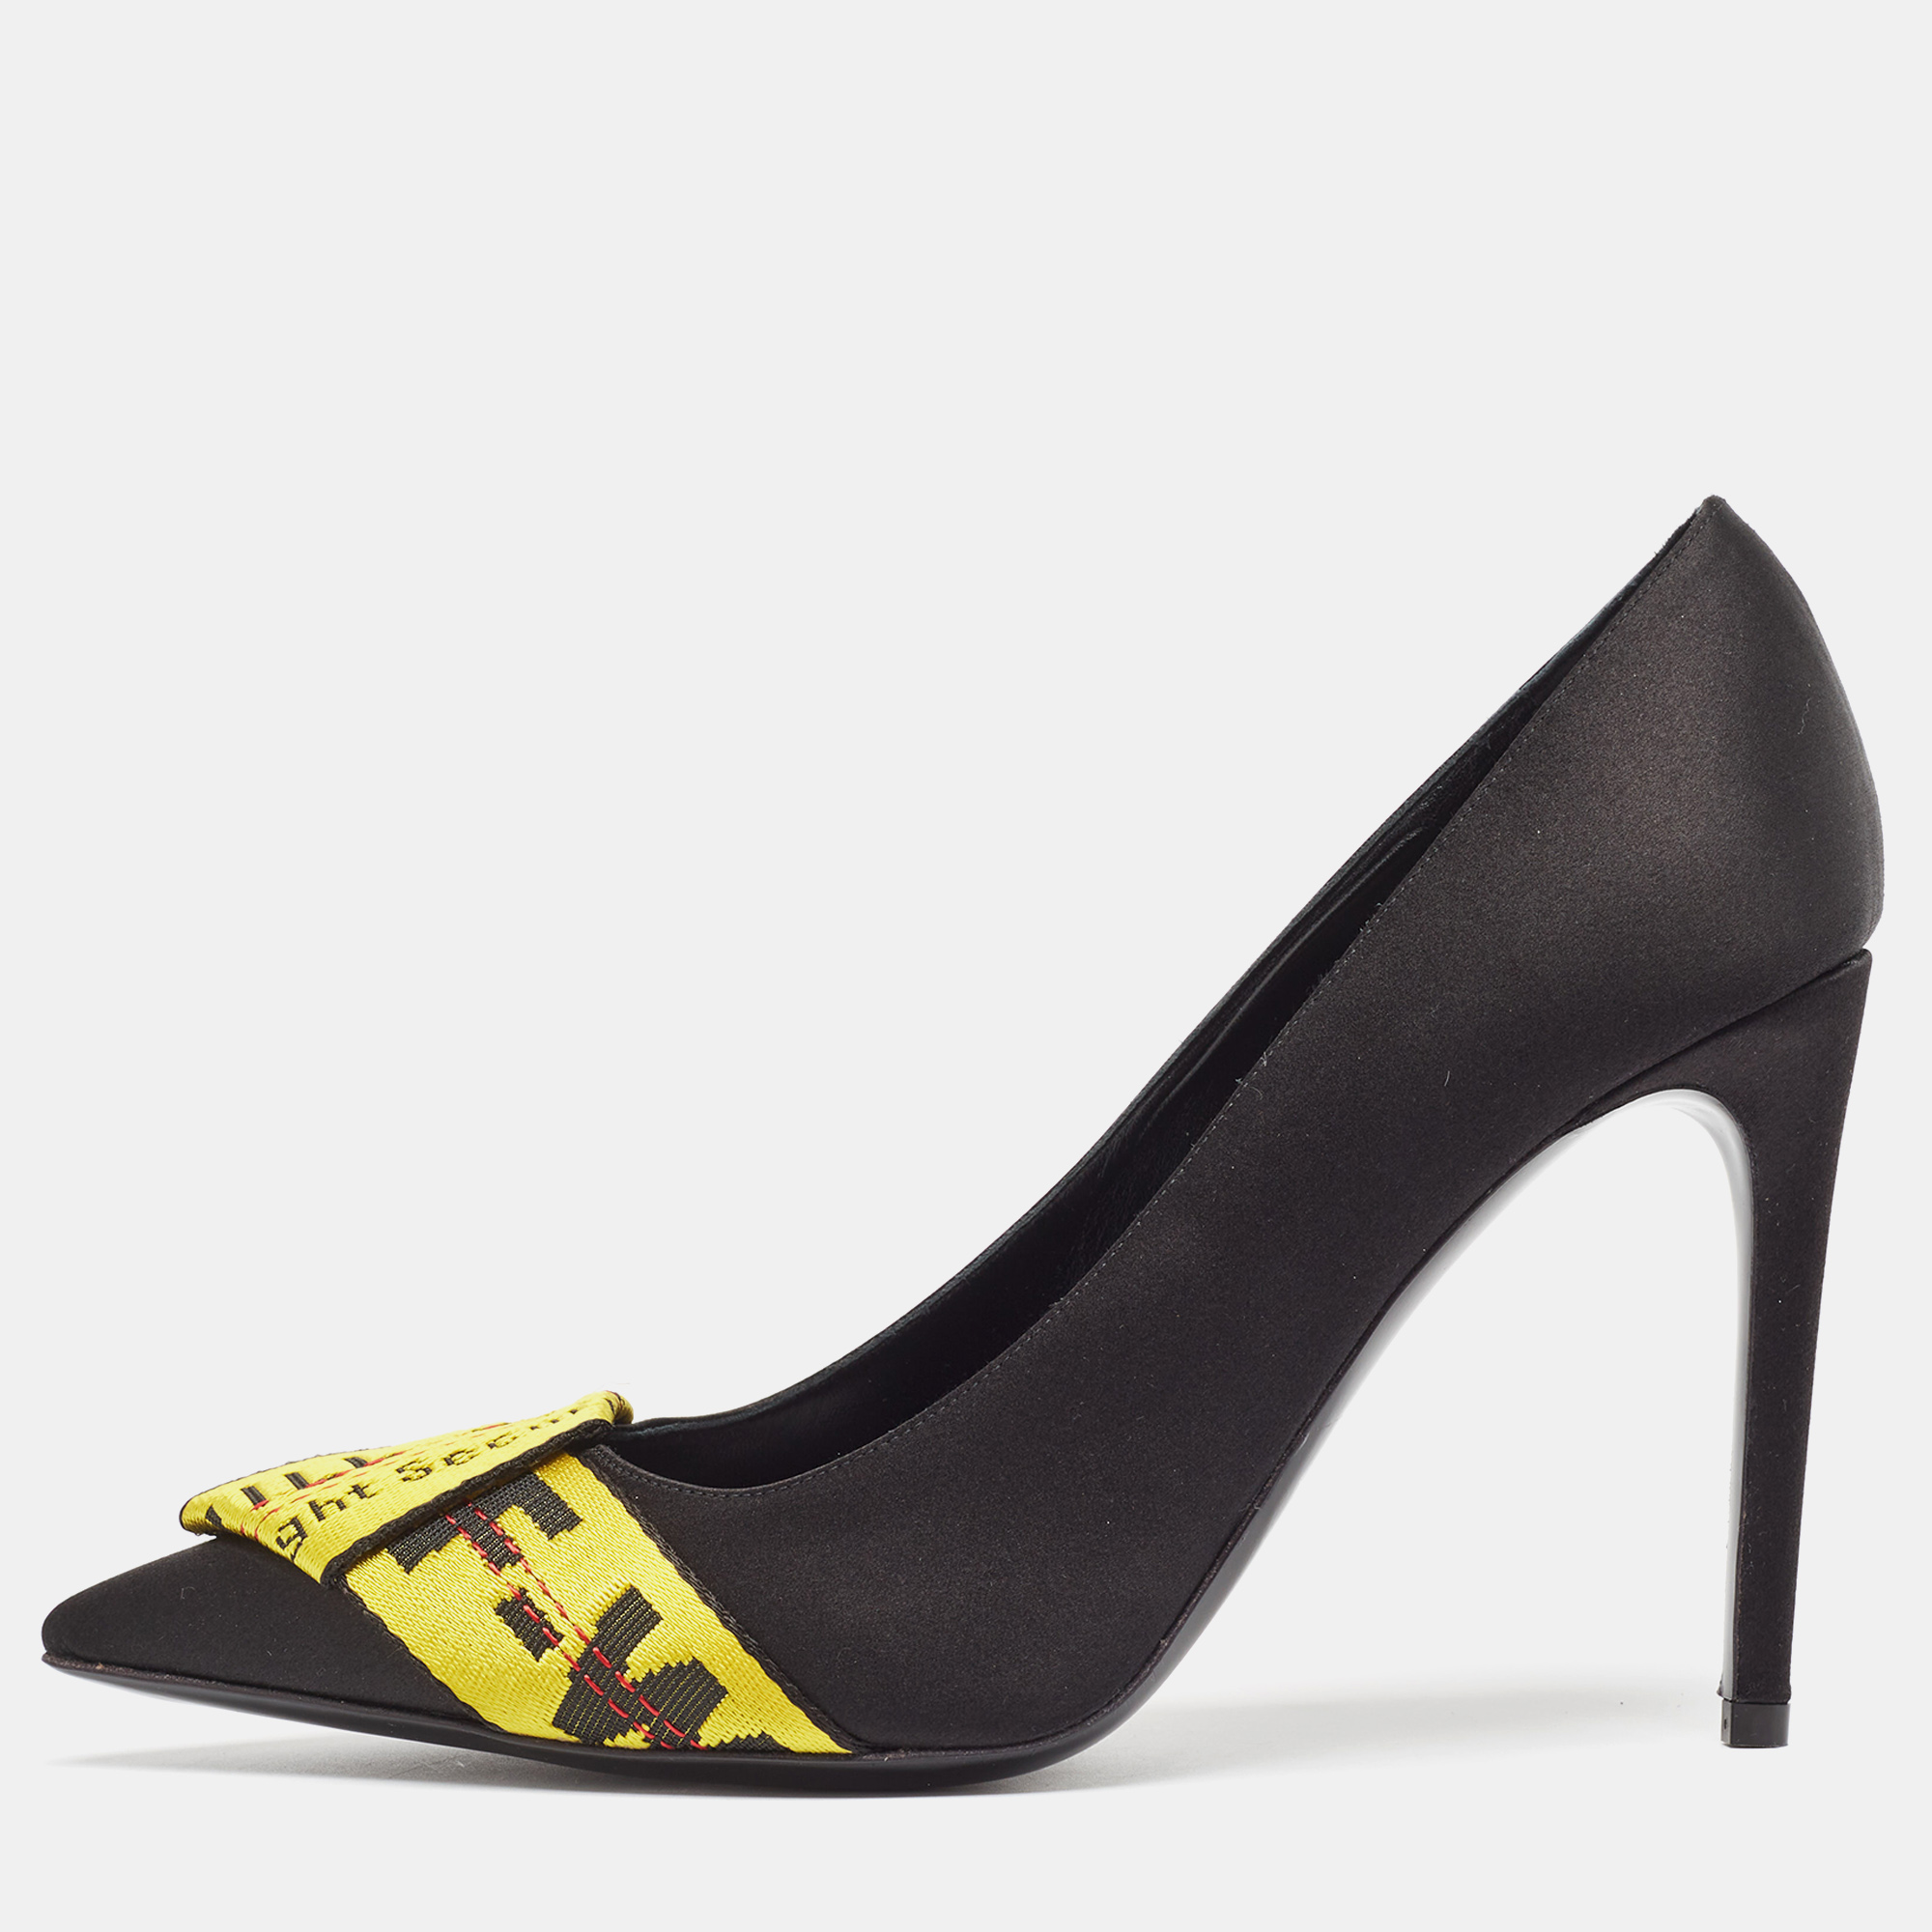 Off-white black/yellow satin and logo canvas commercial bow pumps size 39